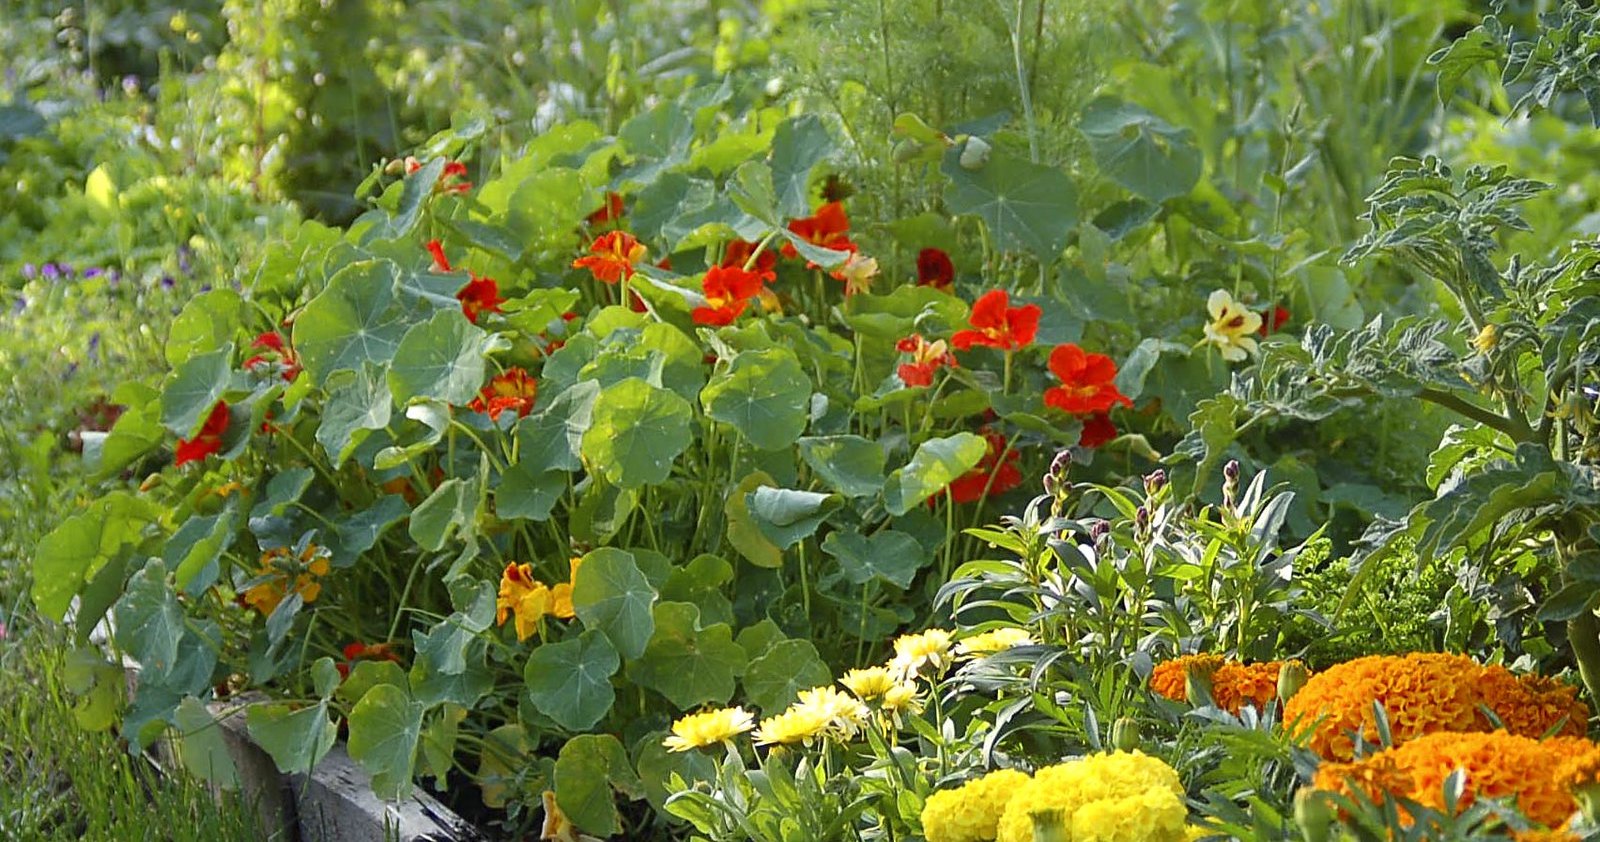 Companion Planting for More Fruitful and Sustainable At-Home Food Production